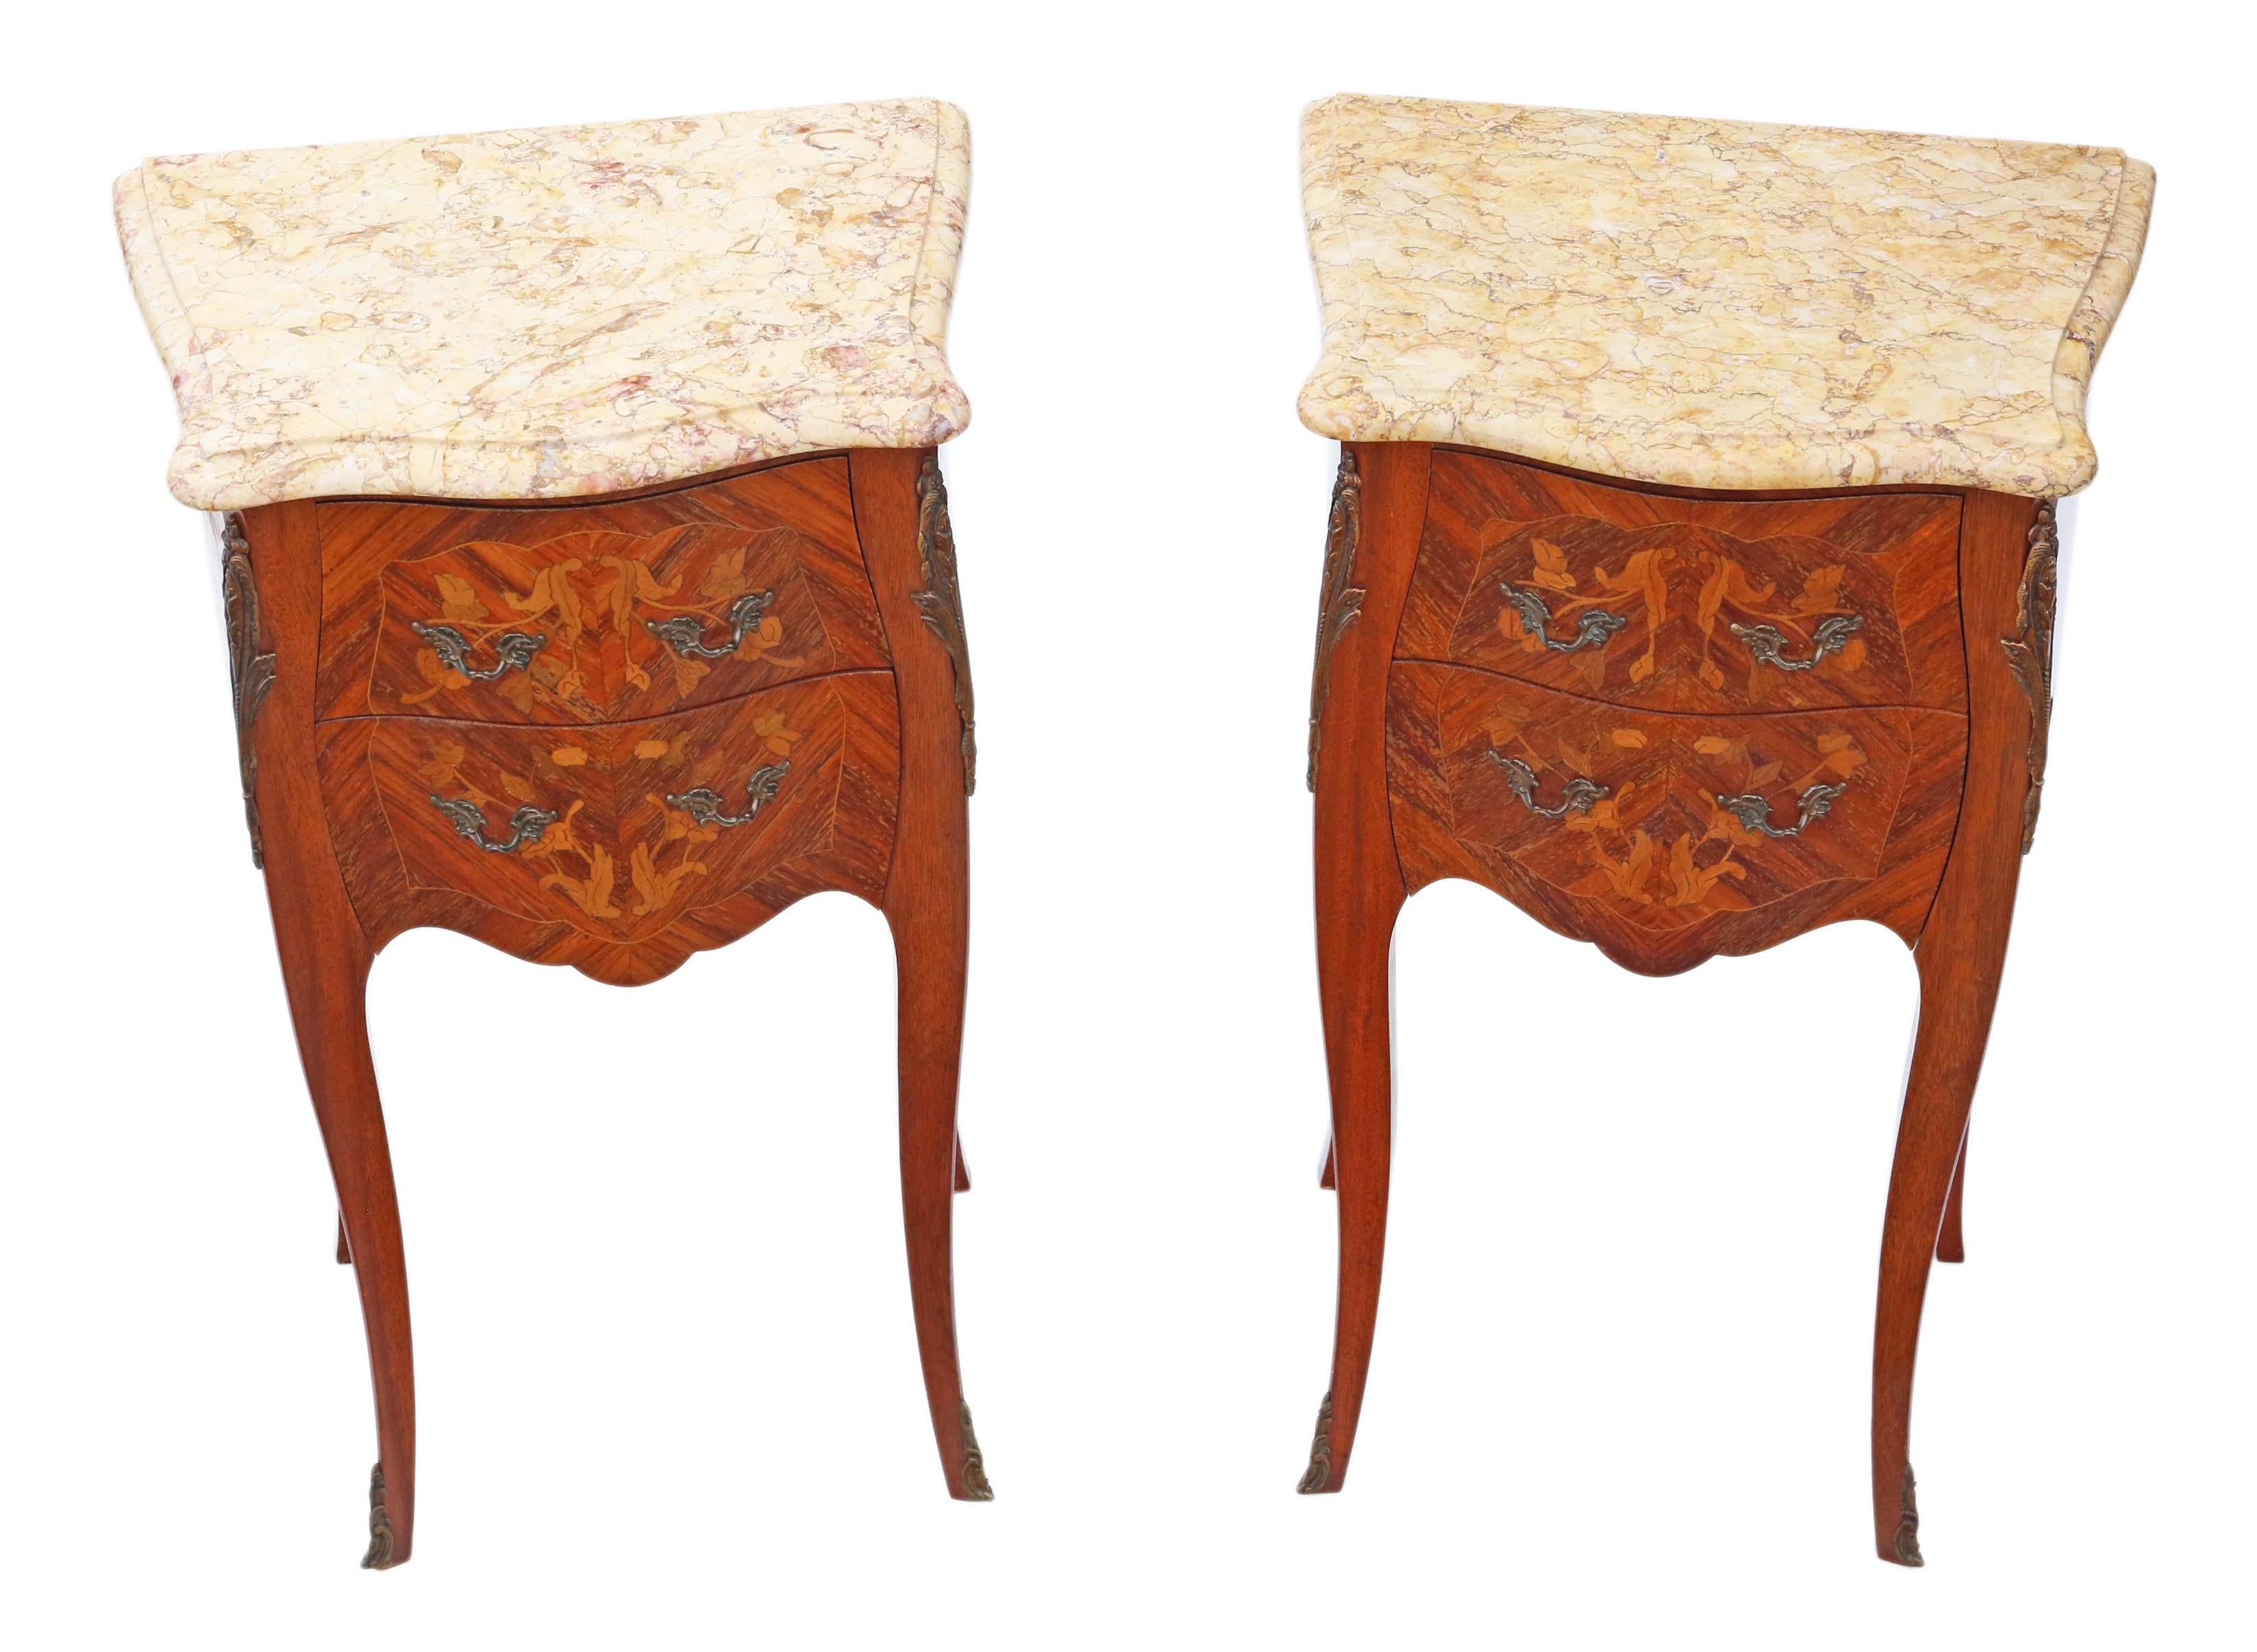 Antique quality pair of French inlaid marquetry bow front bedside tables cupboards, circa 1910-1920. Loose marble tops (as is usual).
No loose joints and no woodworm. Full of age, character and charm. Attractive marquetry inlays and brass ormolu